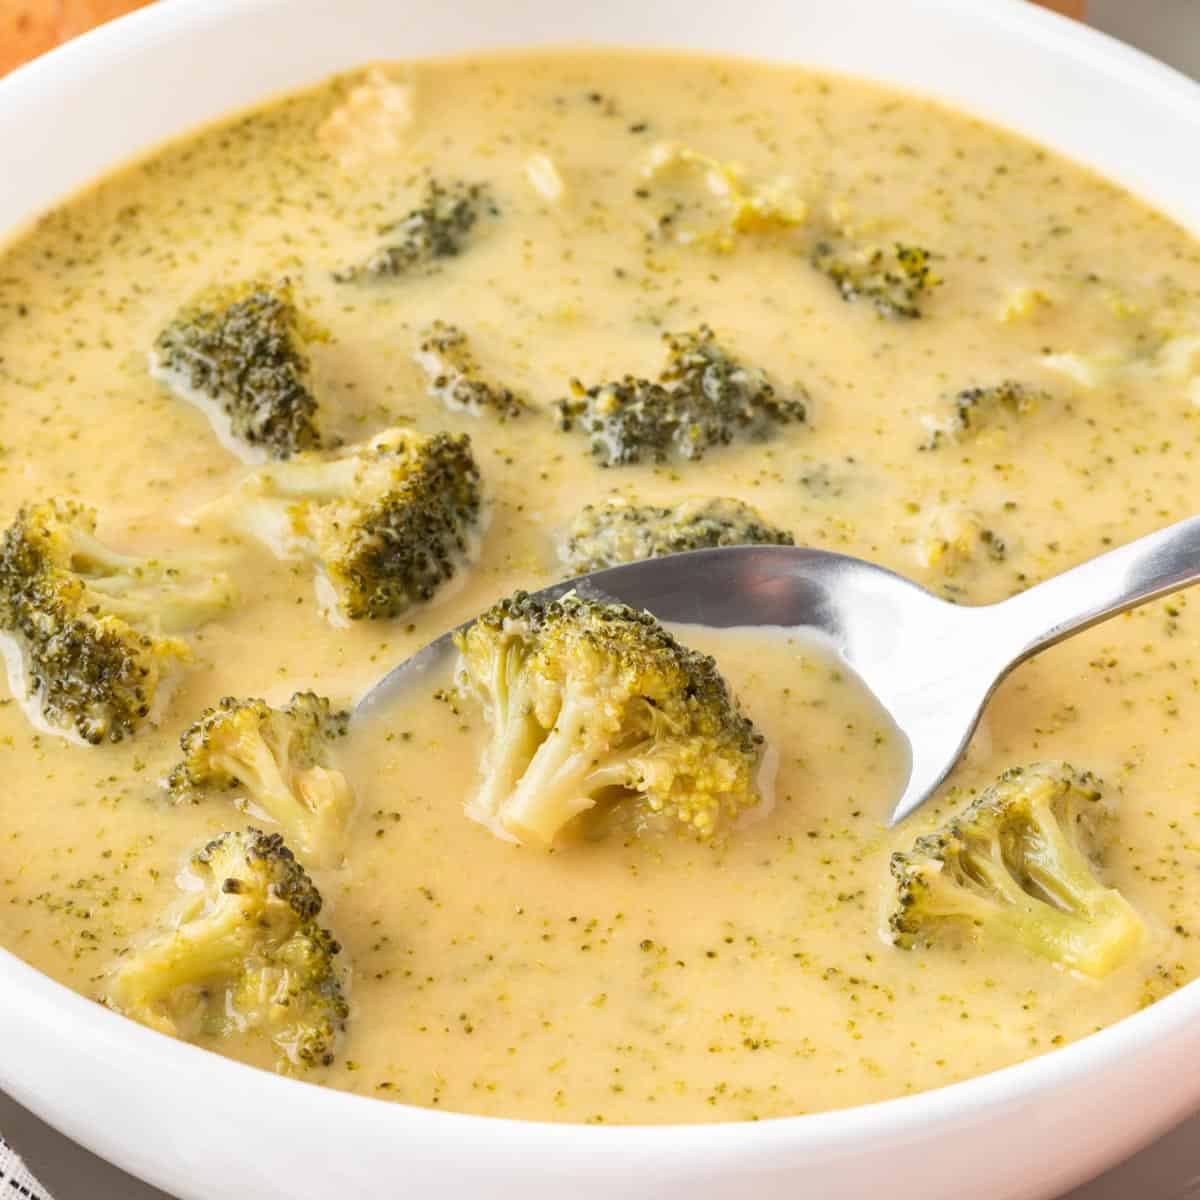 A square photo of a spoon scooping up broccoli out of a bowl of broccoli soup.